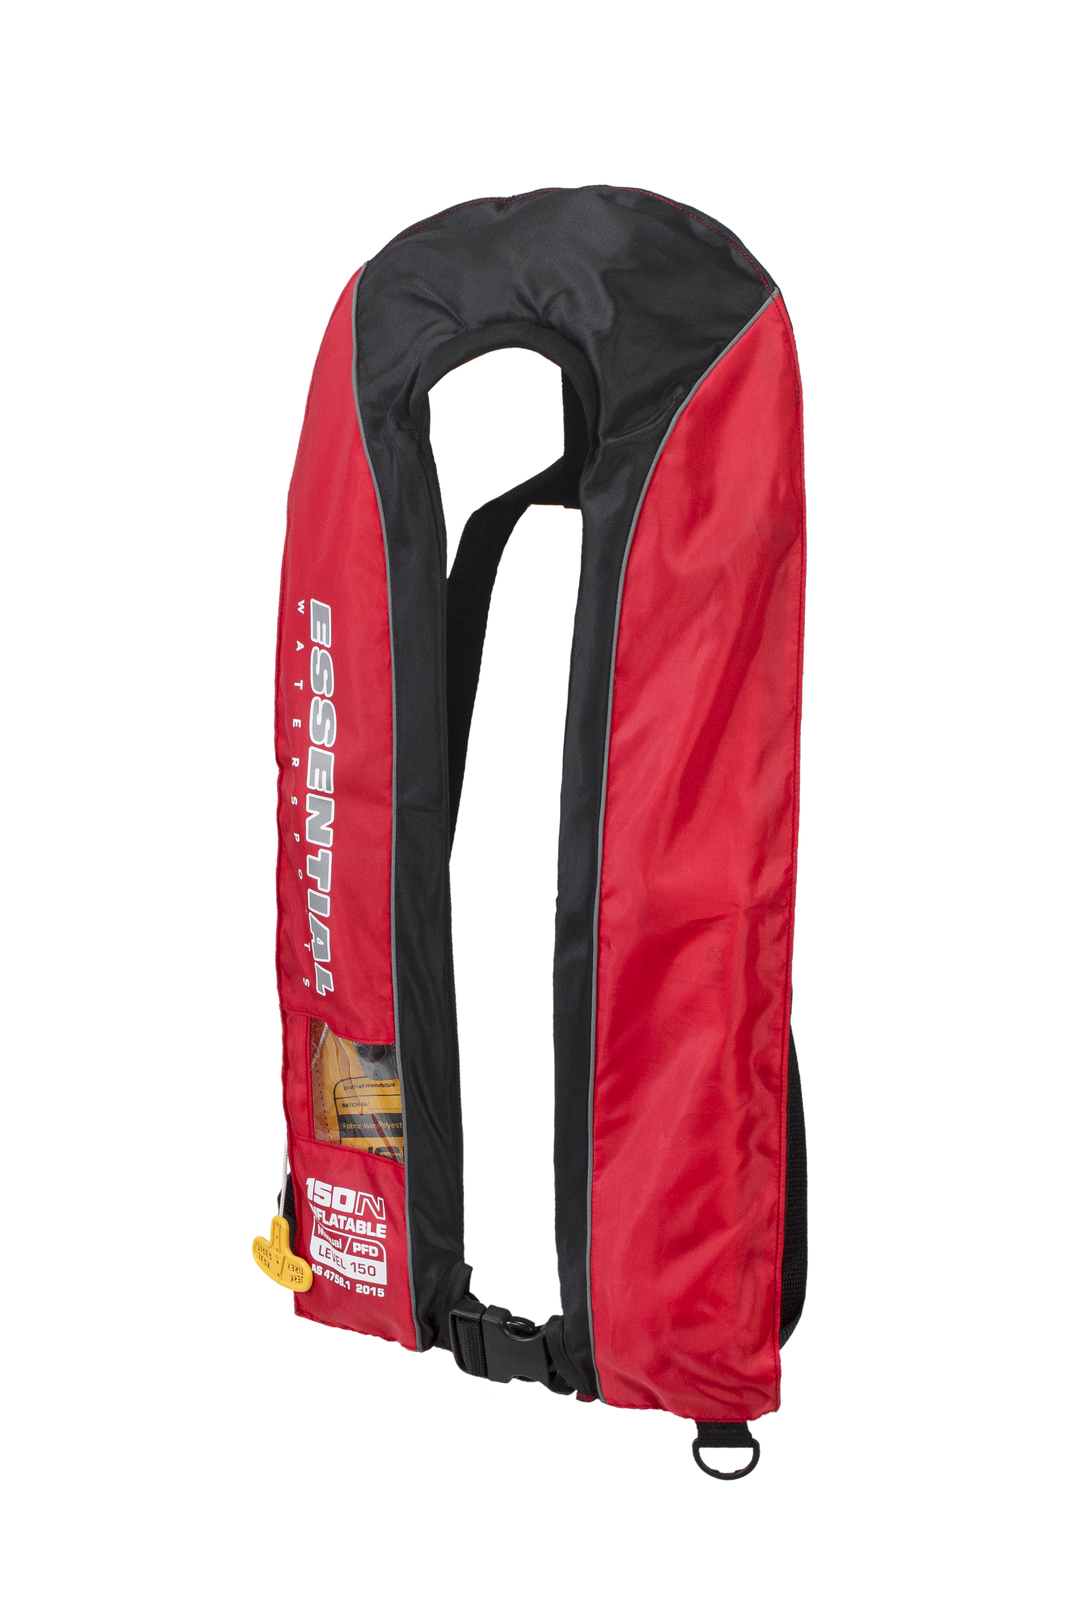 Essential Manual Inflatable Jacket Red Approved to AS 4758-1, Level 150 Essential